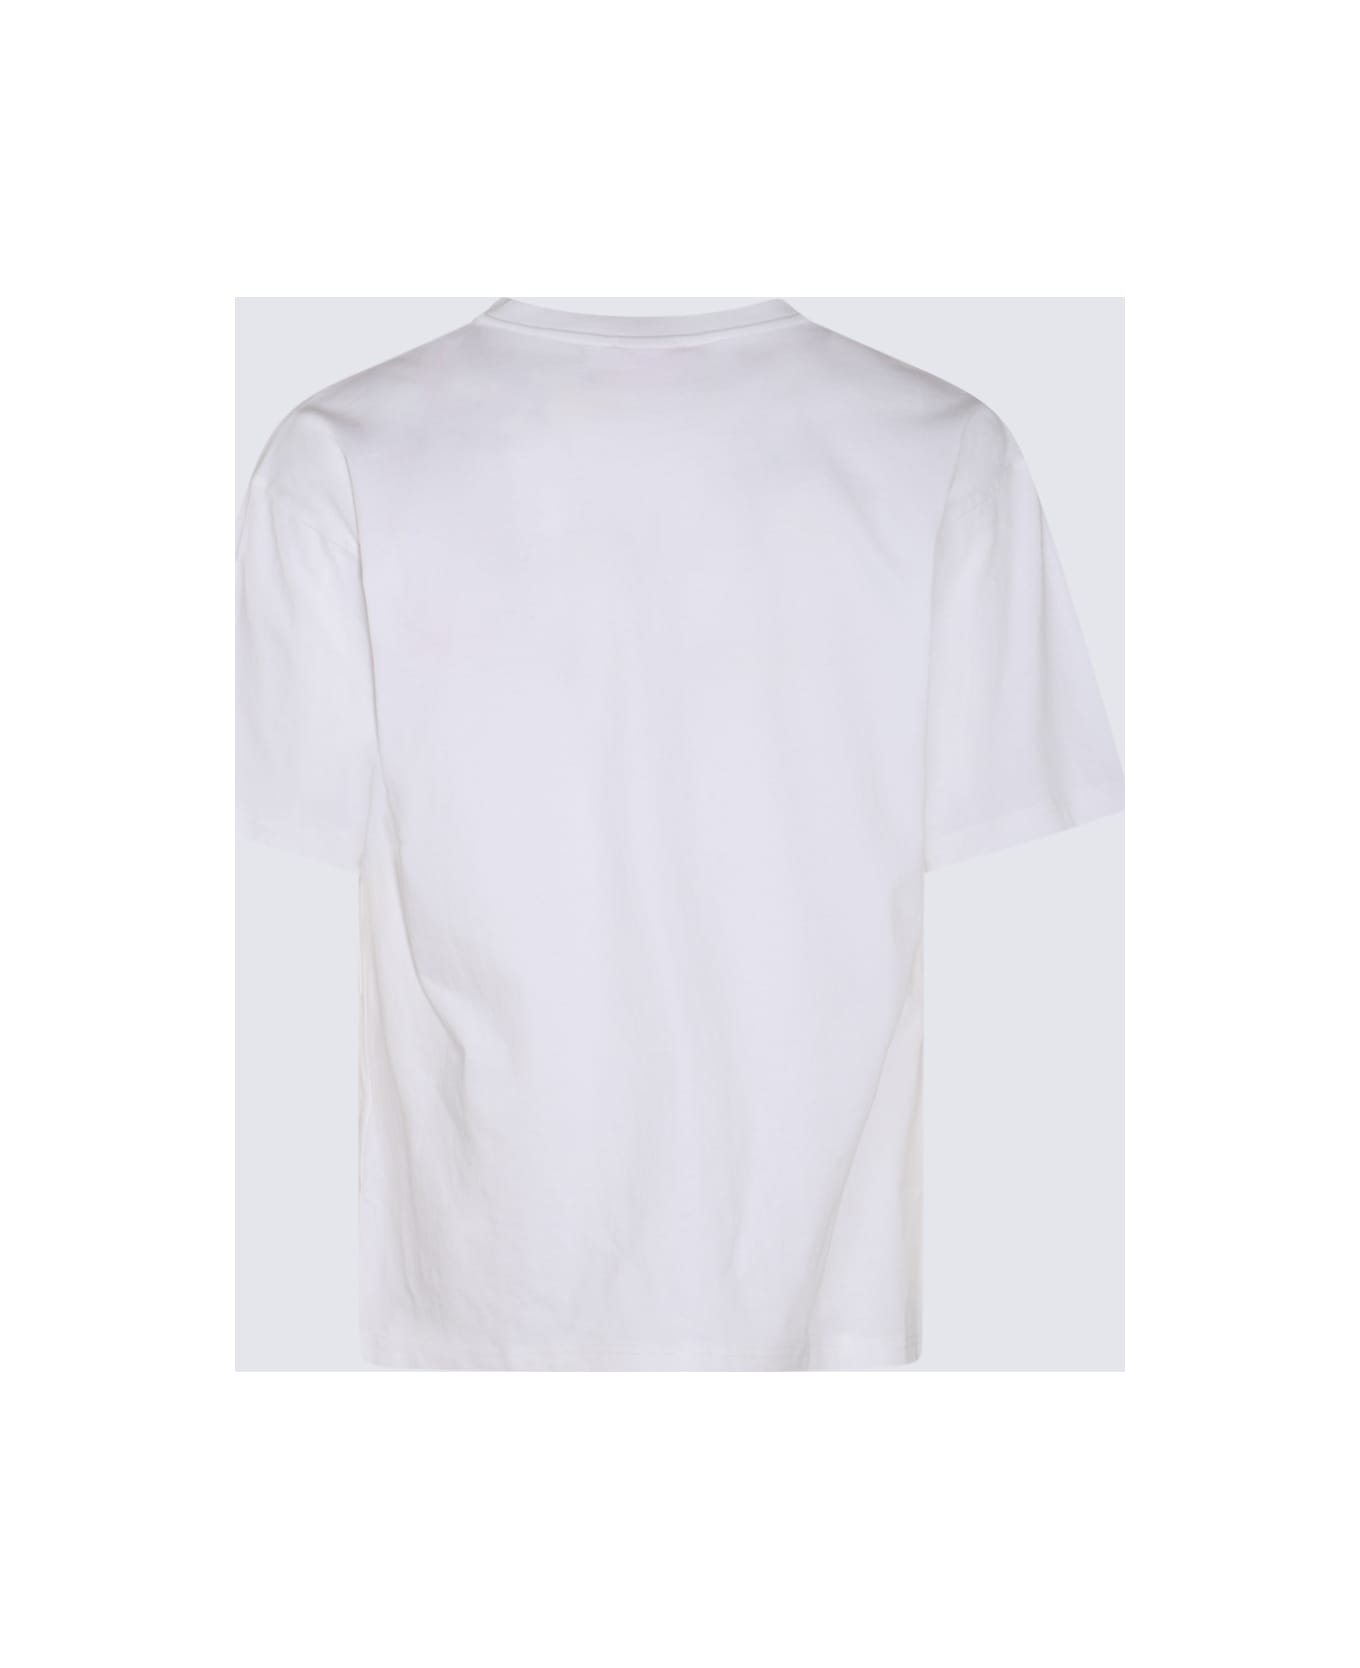 Diesel White And Red Cotton T-shirt - White